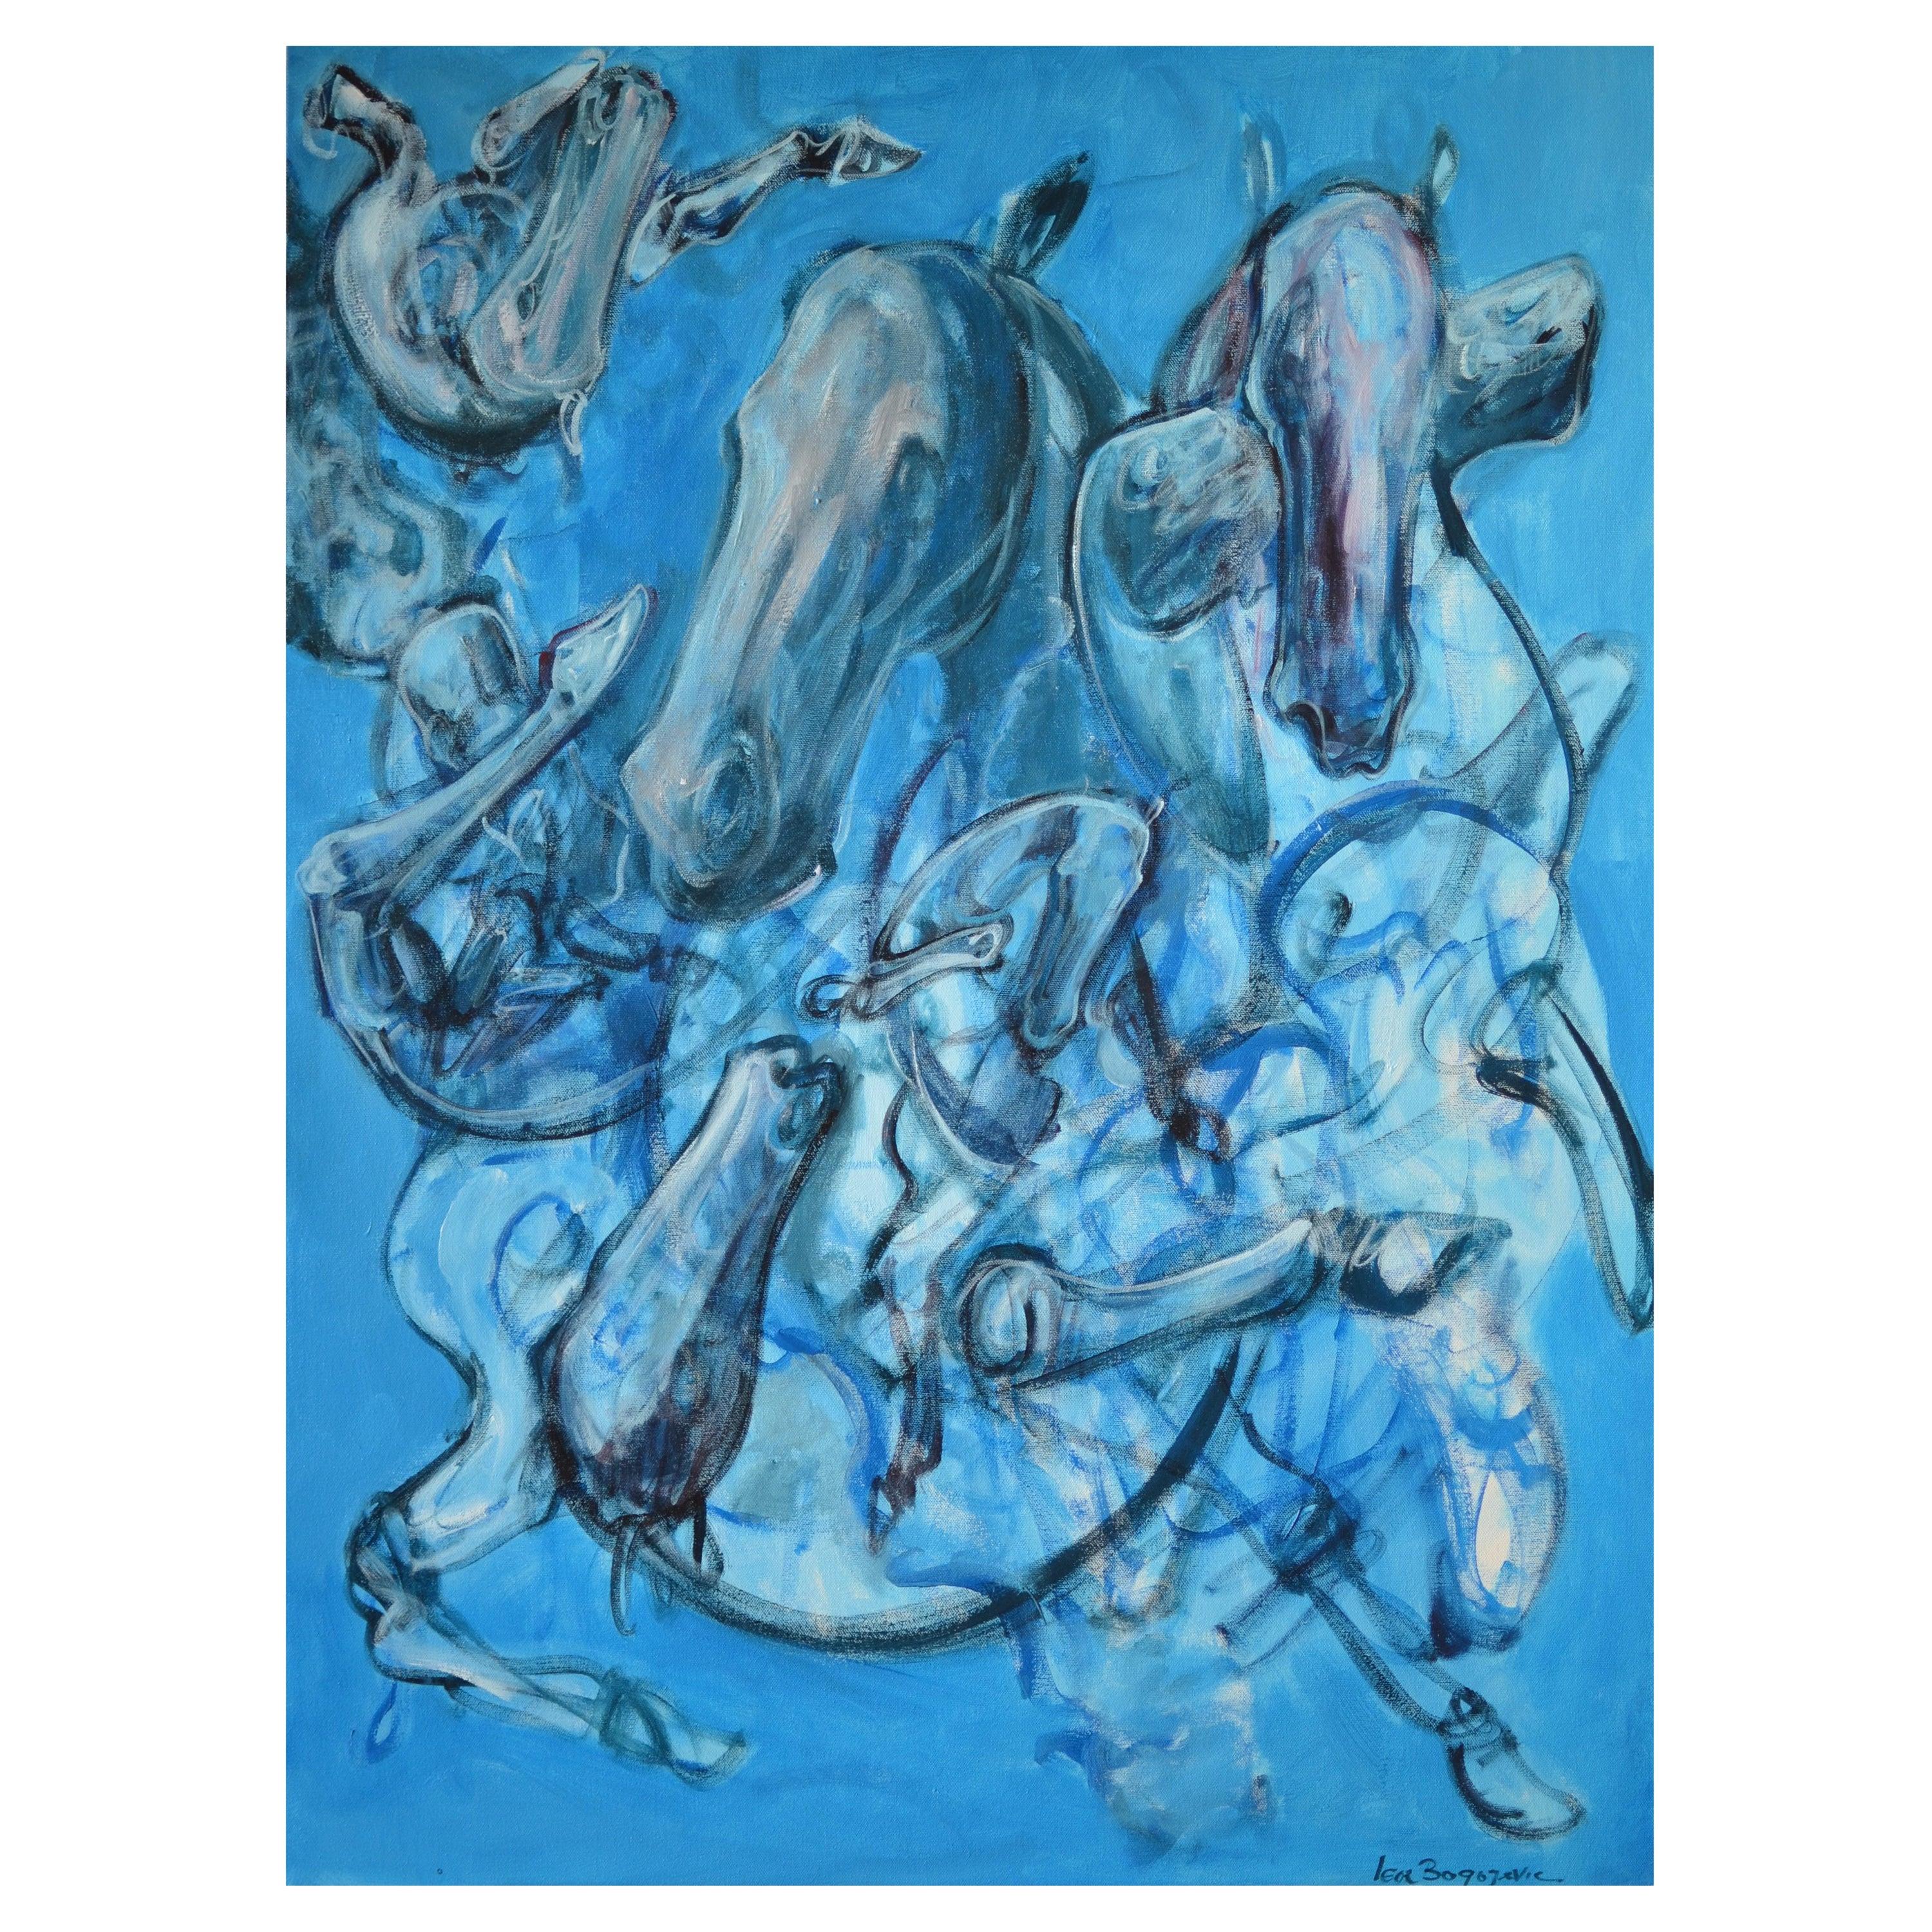 An impressive abstract acrylic on canvas painting of horses by the contemporary artist Igor Bogojevic ( Montenegro Born in 1980 ). The painting features a vivid blue tone color and showcases amazing details leading to a range of interpretations of